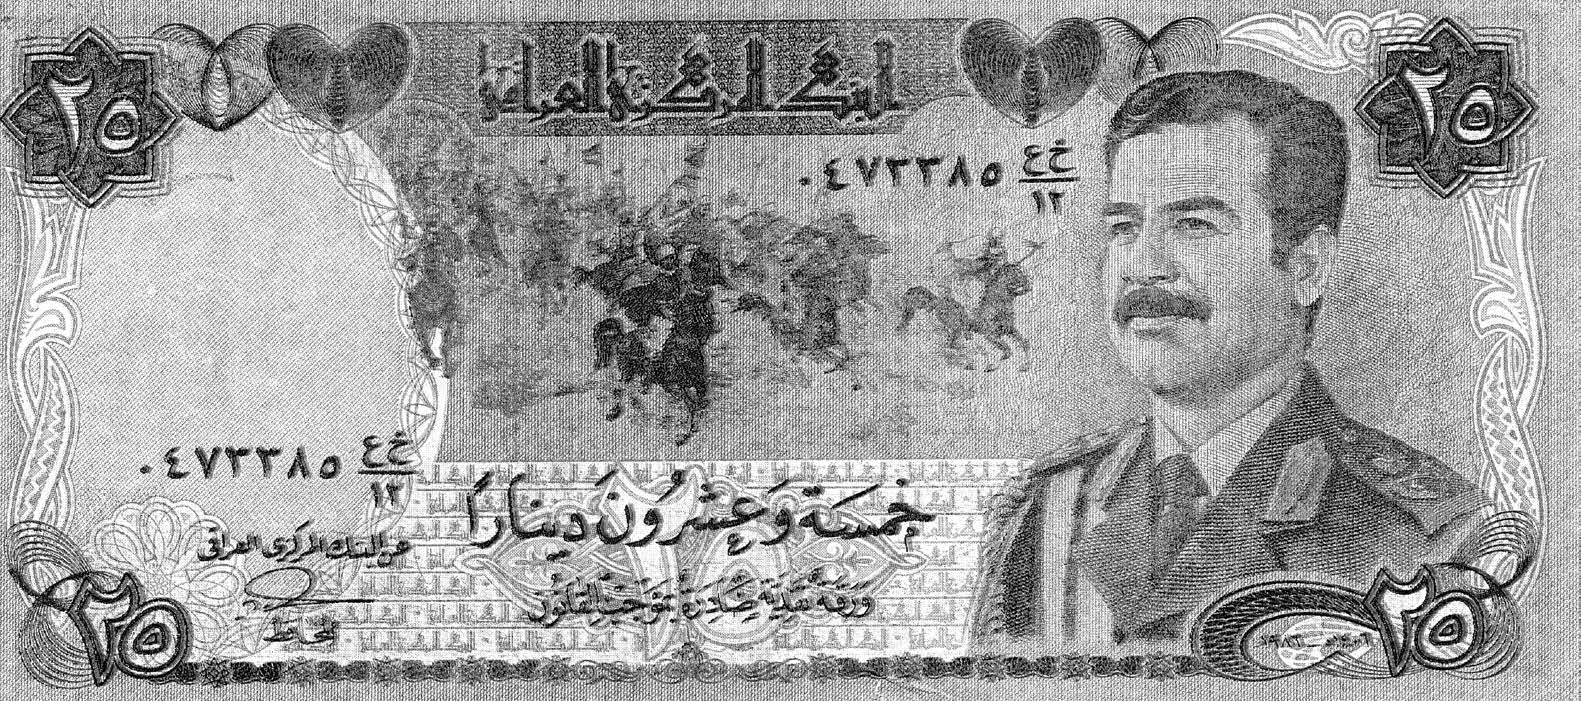 An Iraqi 25 dinar banknote. Courtesy of Brent Johnson.